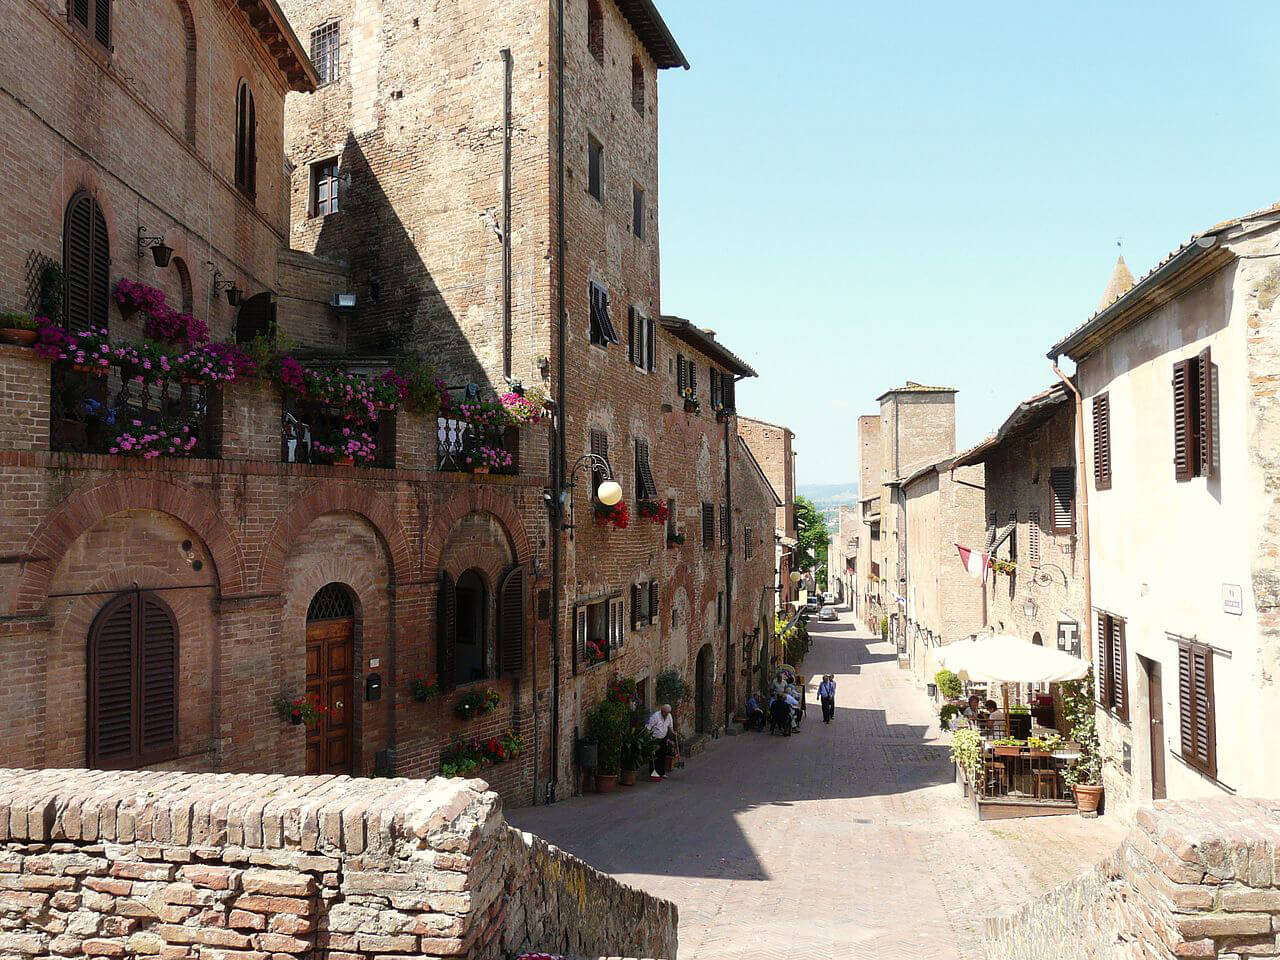 A day view of the medieval town of Certaldo, in Tuscany.